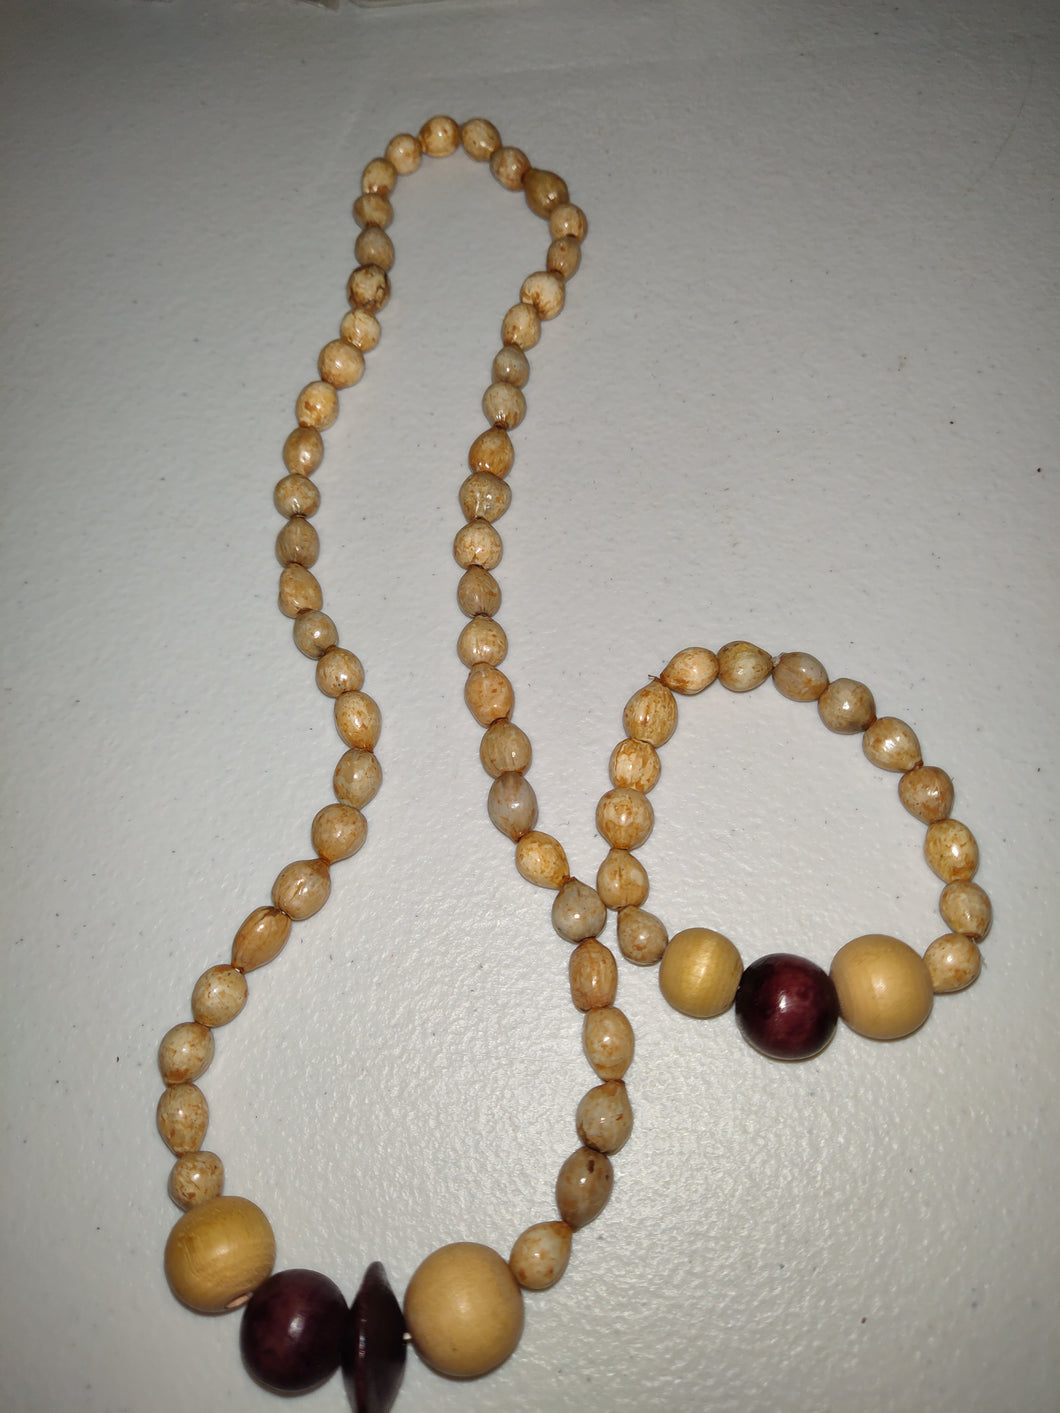 Handmade Seed Pod And Wood Beaded Necklace With Matching Bracelet